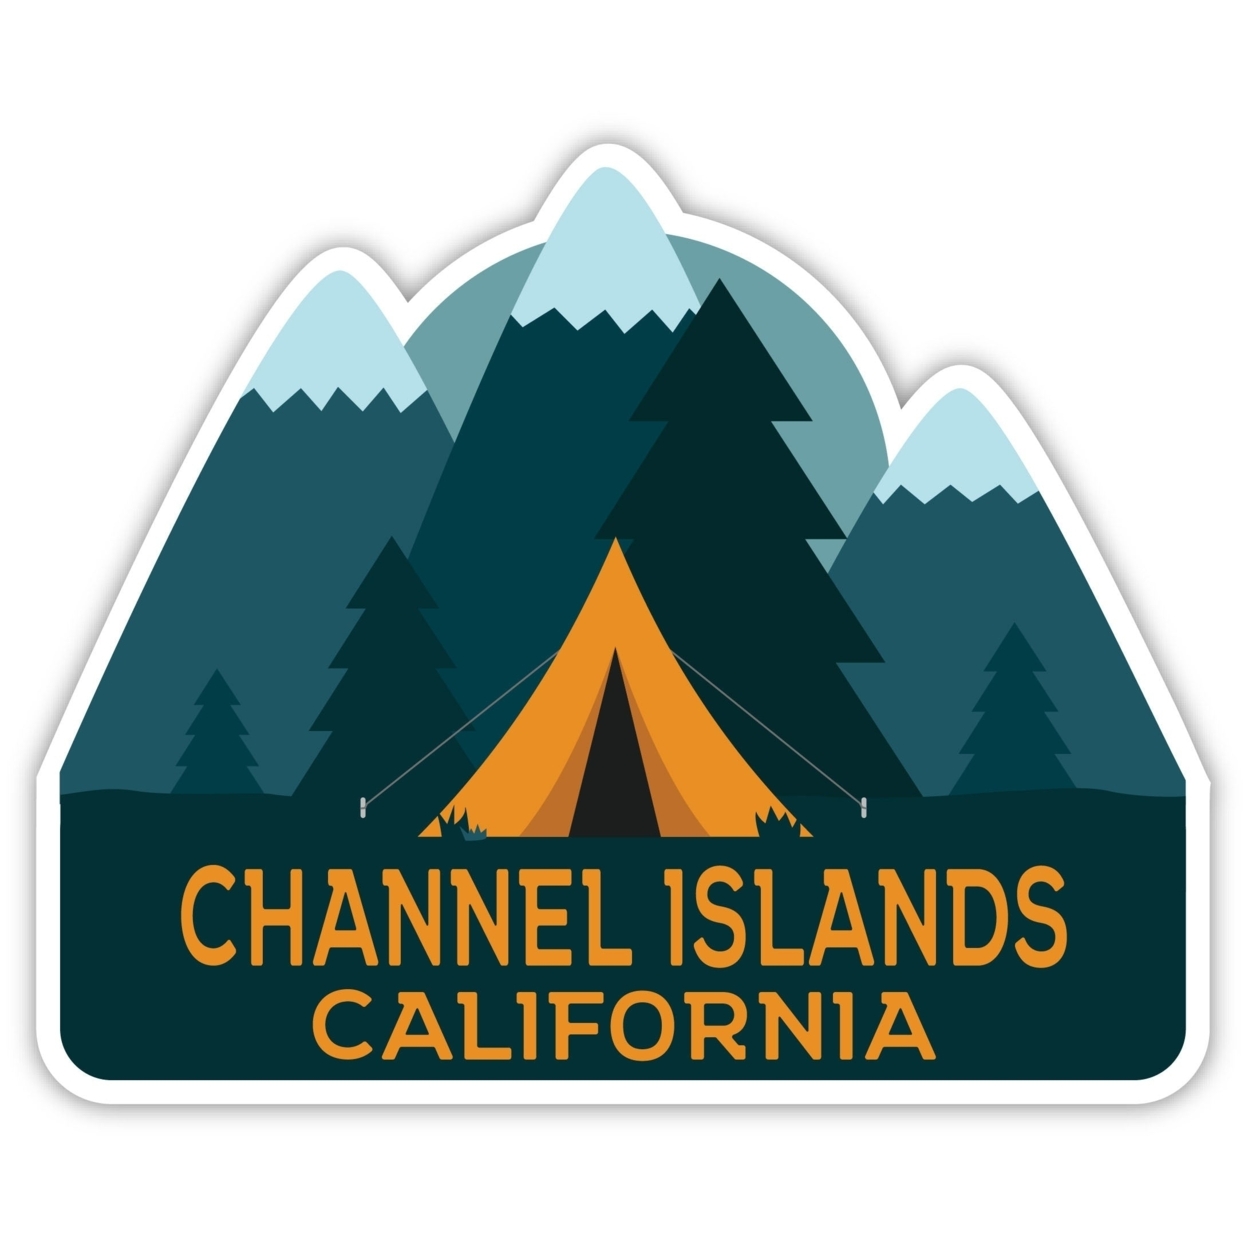 Channel Islands California Souvenir Decorative Stickers (Choose Theme And Size) - 4-Pack, 4-Inch, Tent